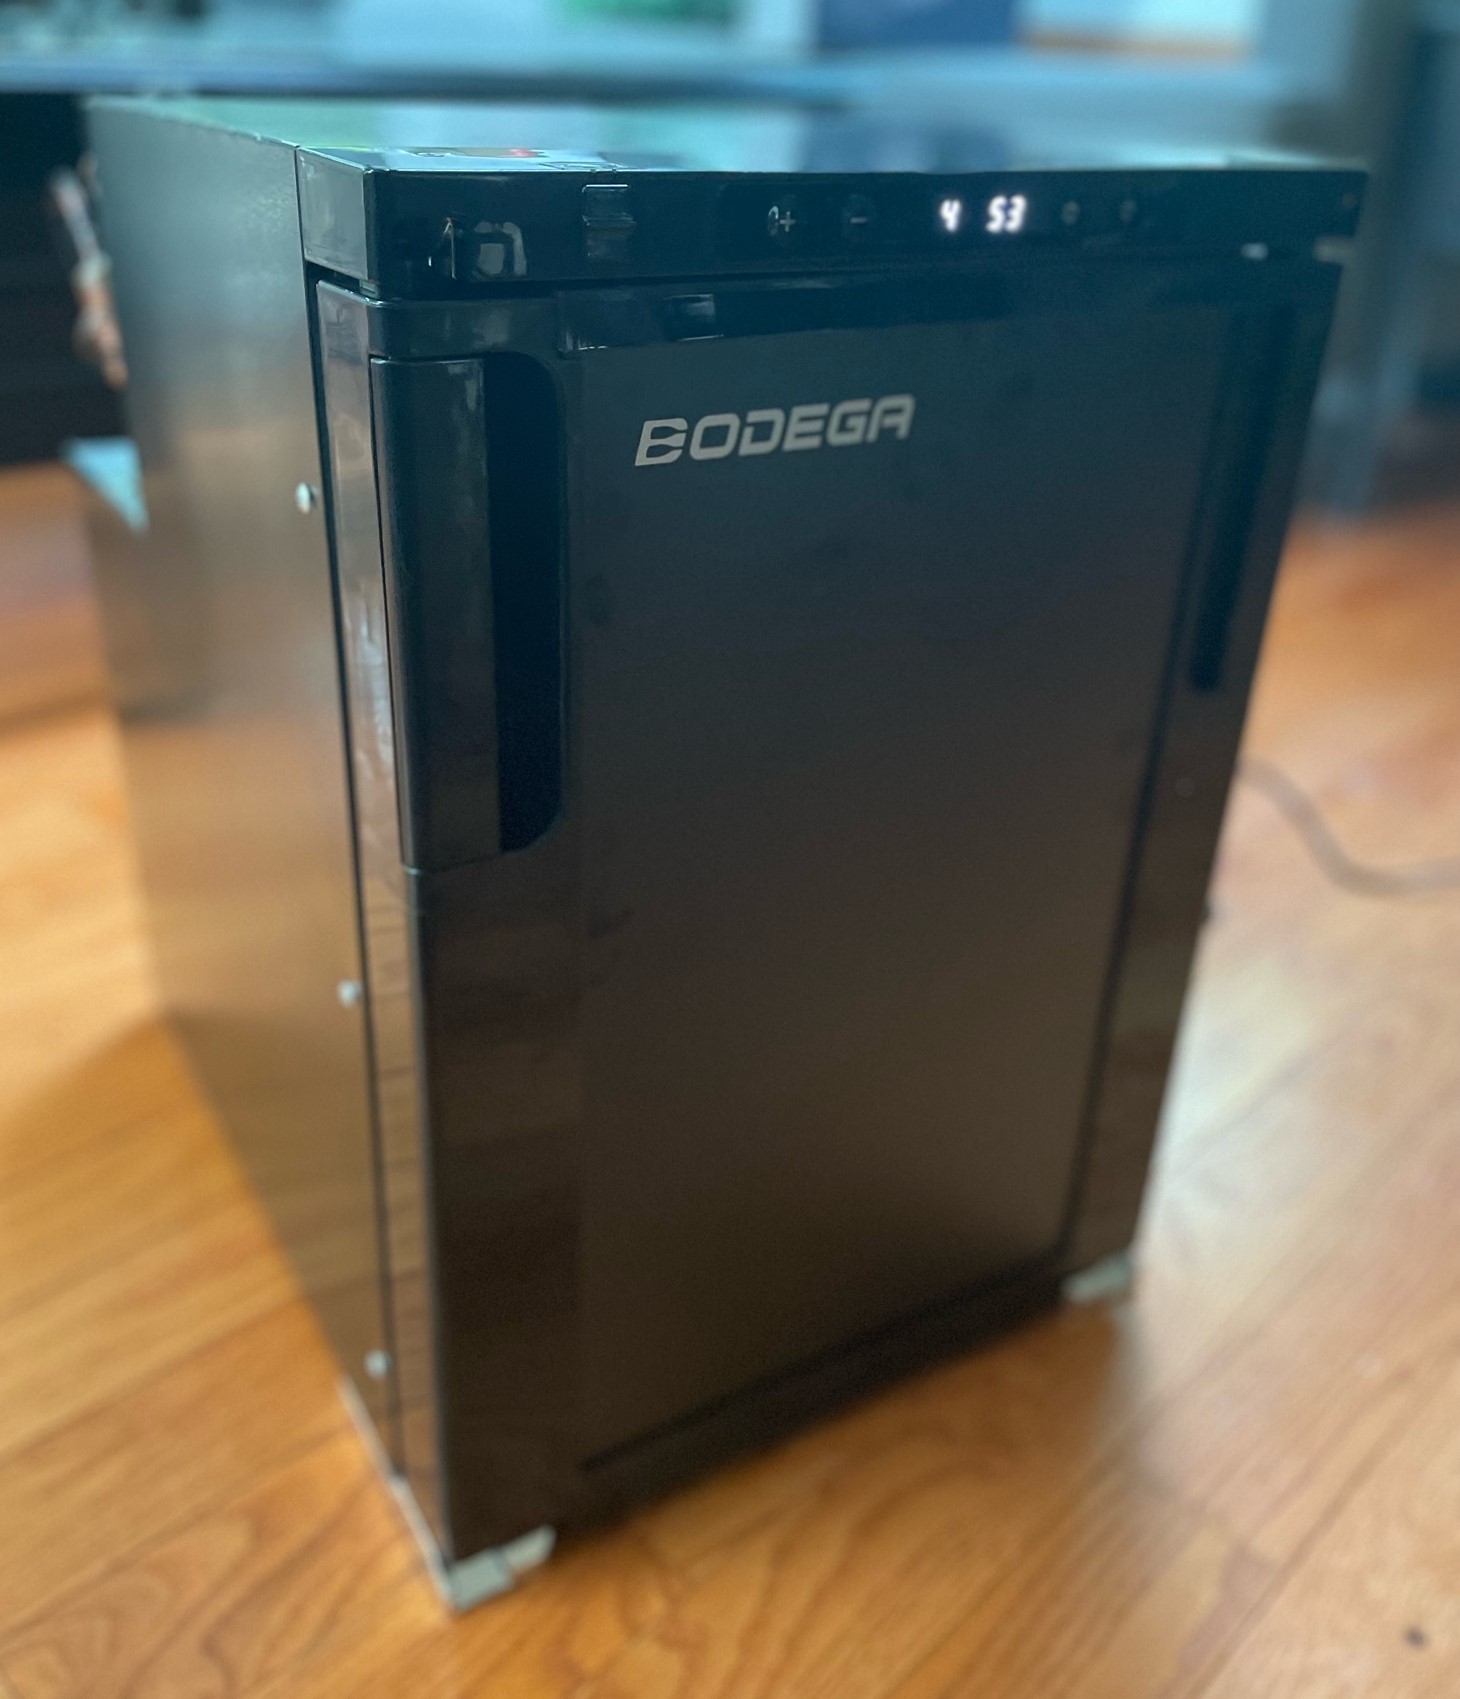 Bodega 12/24-volt RV Refrigerator review – Portable cooling when you need it most